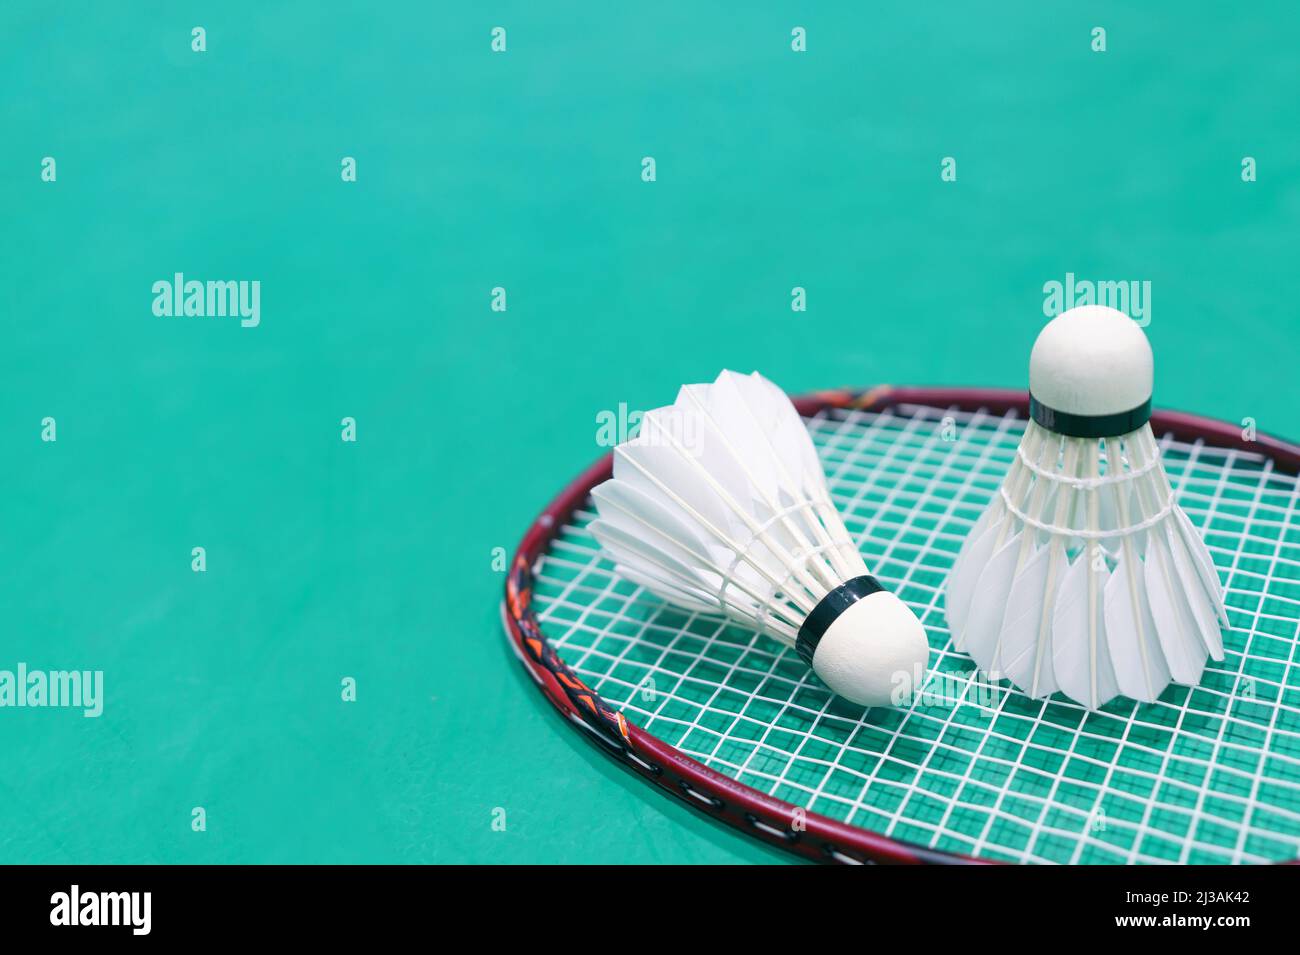 new shuttlecock on green badminton playing court Stock Photo